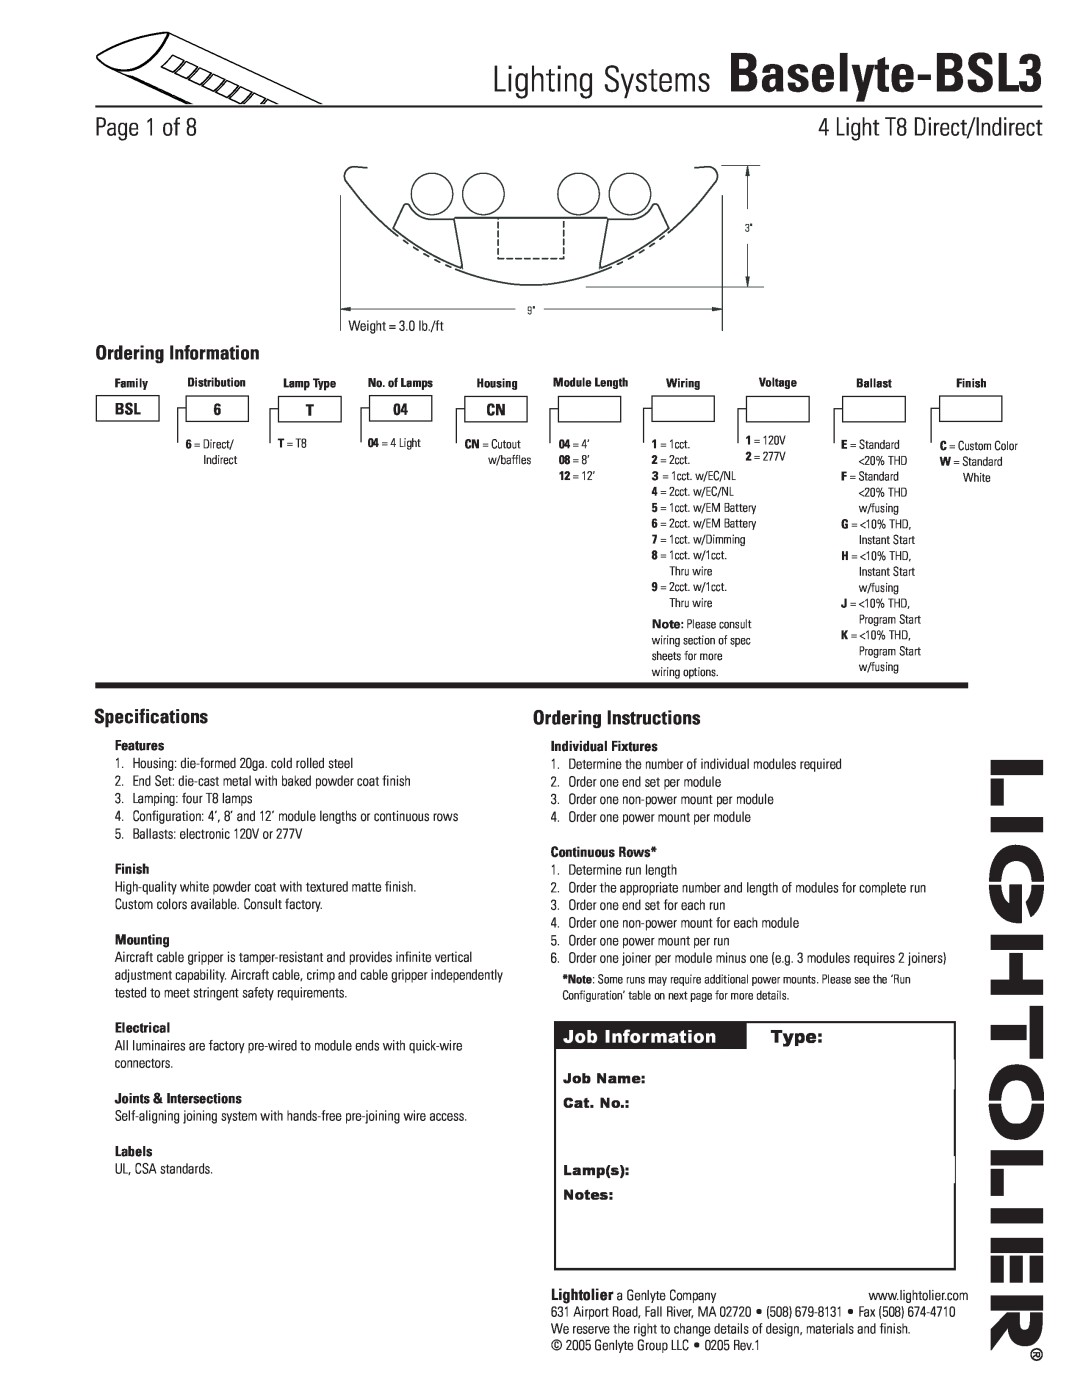 Lightolier specifications Lighting Systems Baselyte-BSL3, Page  of, Light T8 Direct/Indirect, Ordering Information 